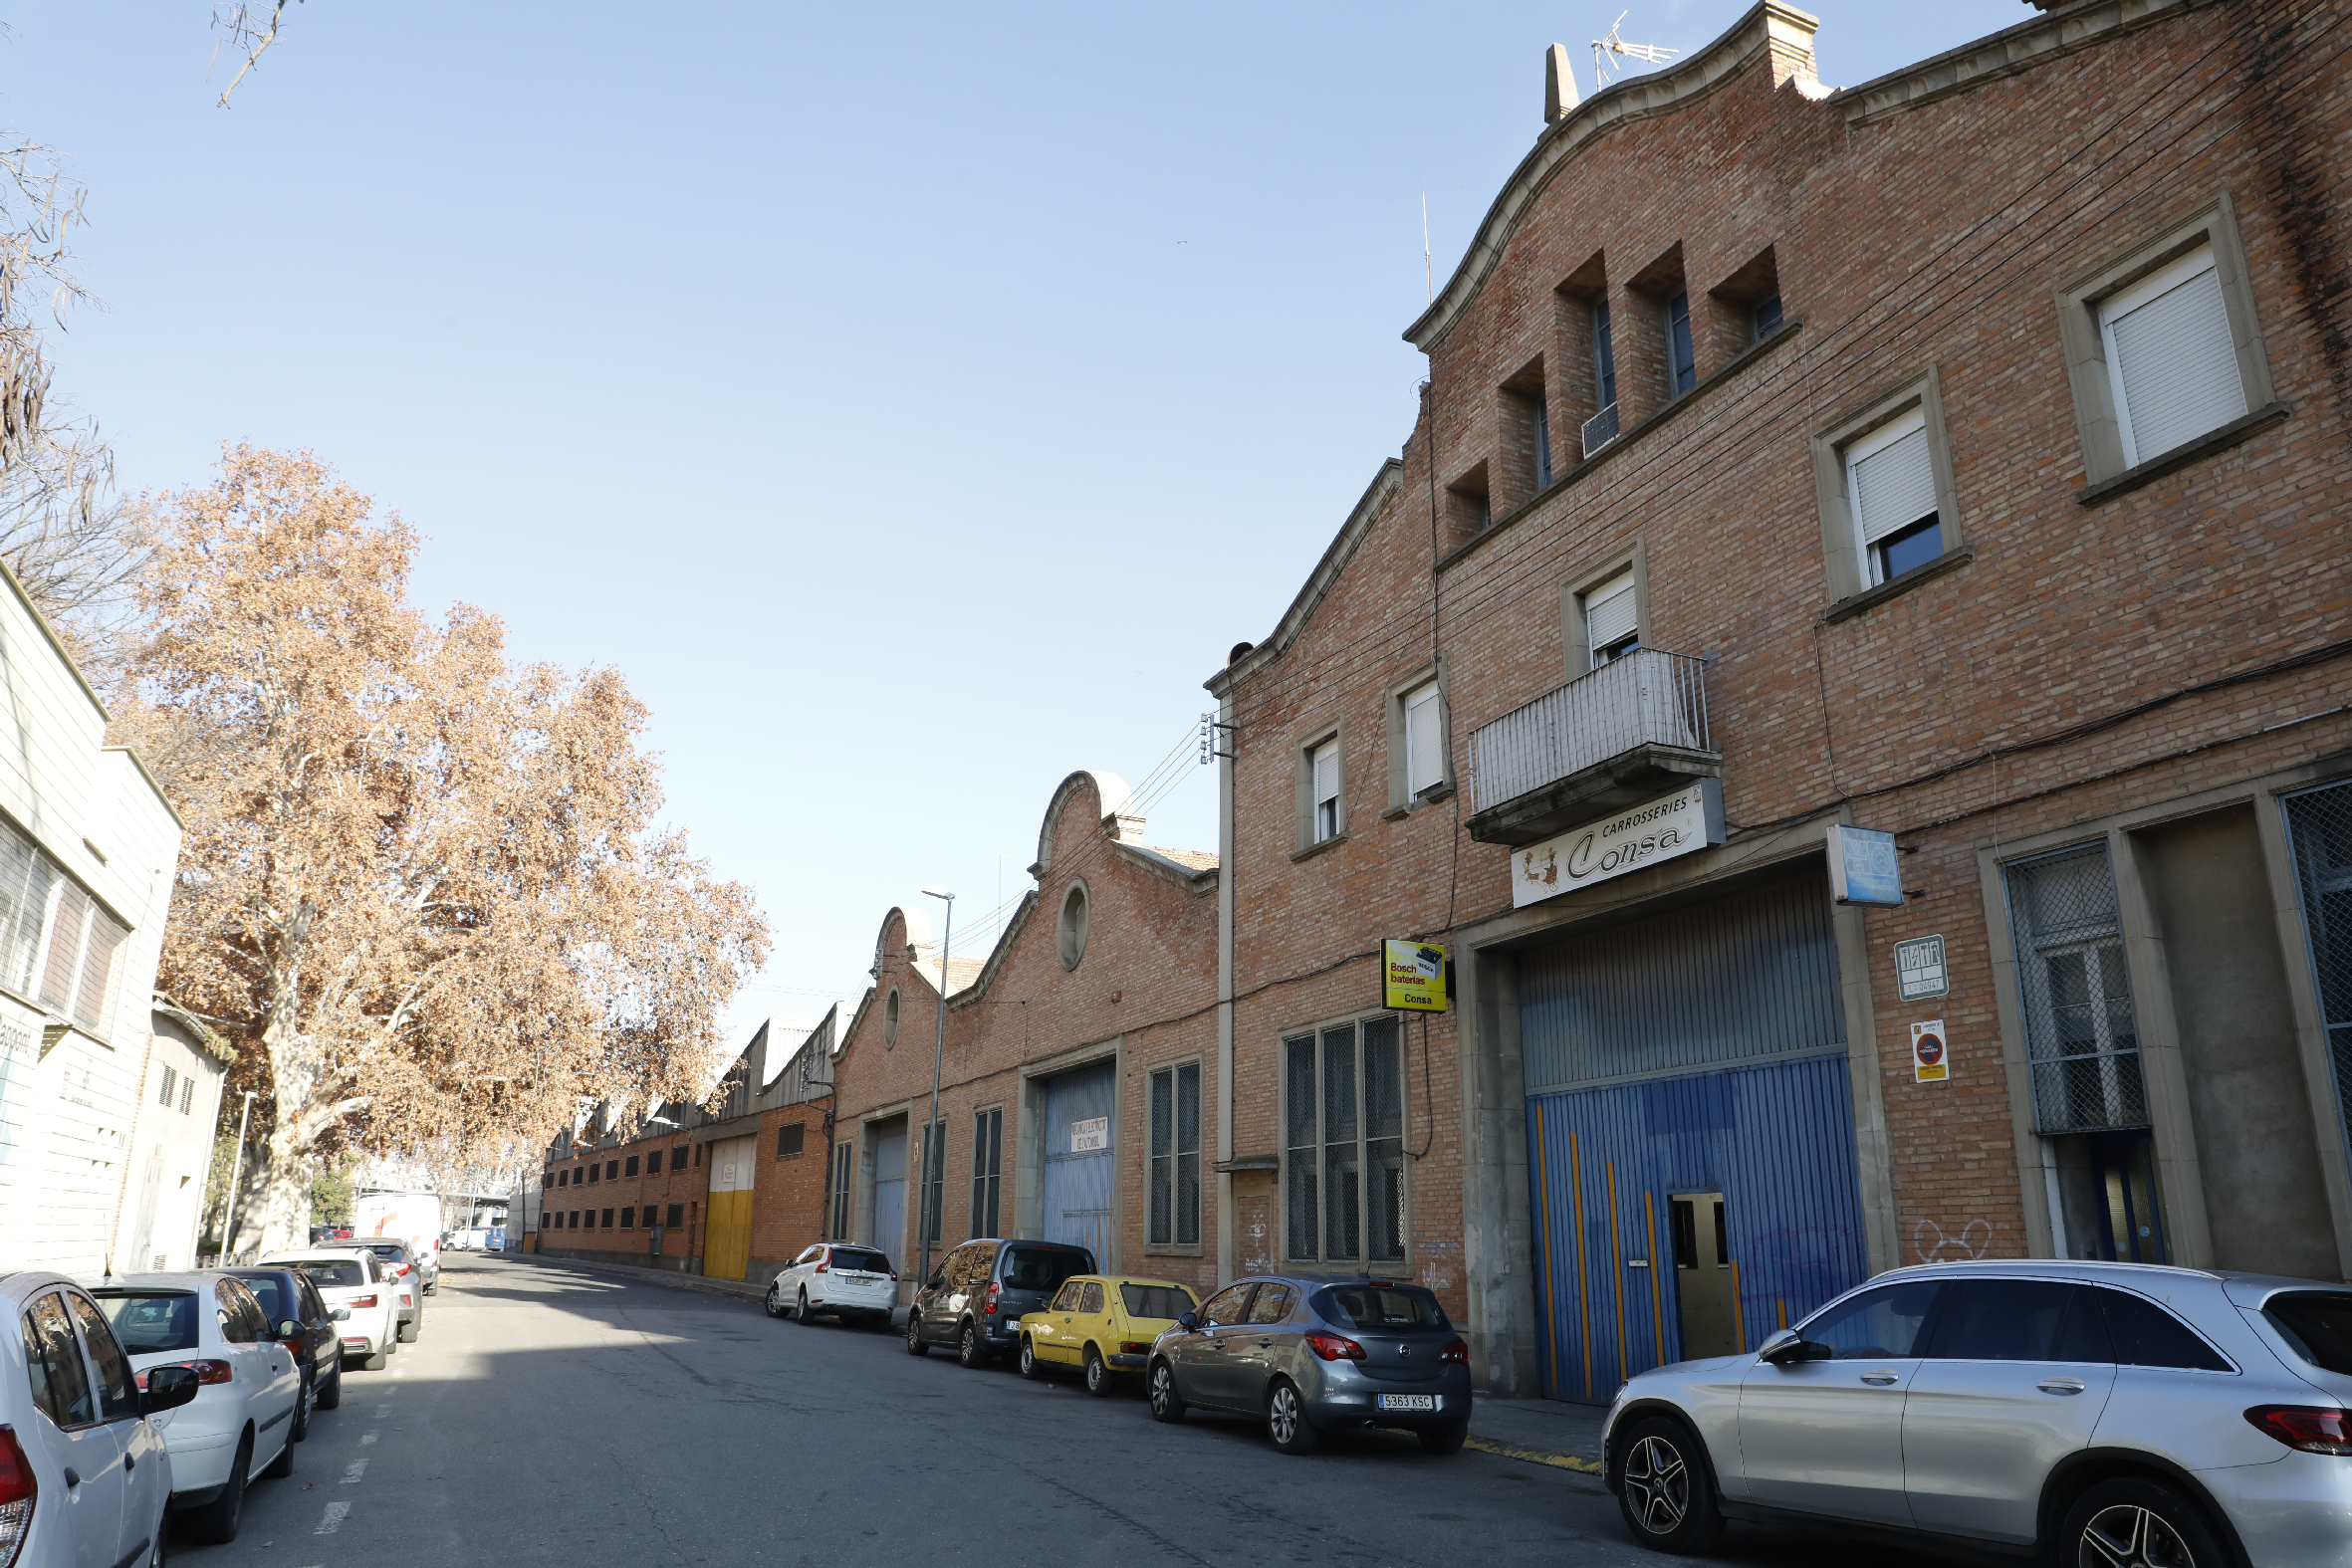 Carrosseries Consa left the workshops where it had been since 1947 last Monday.